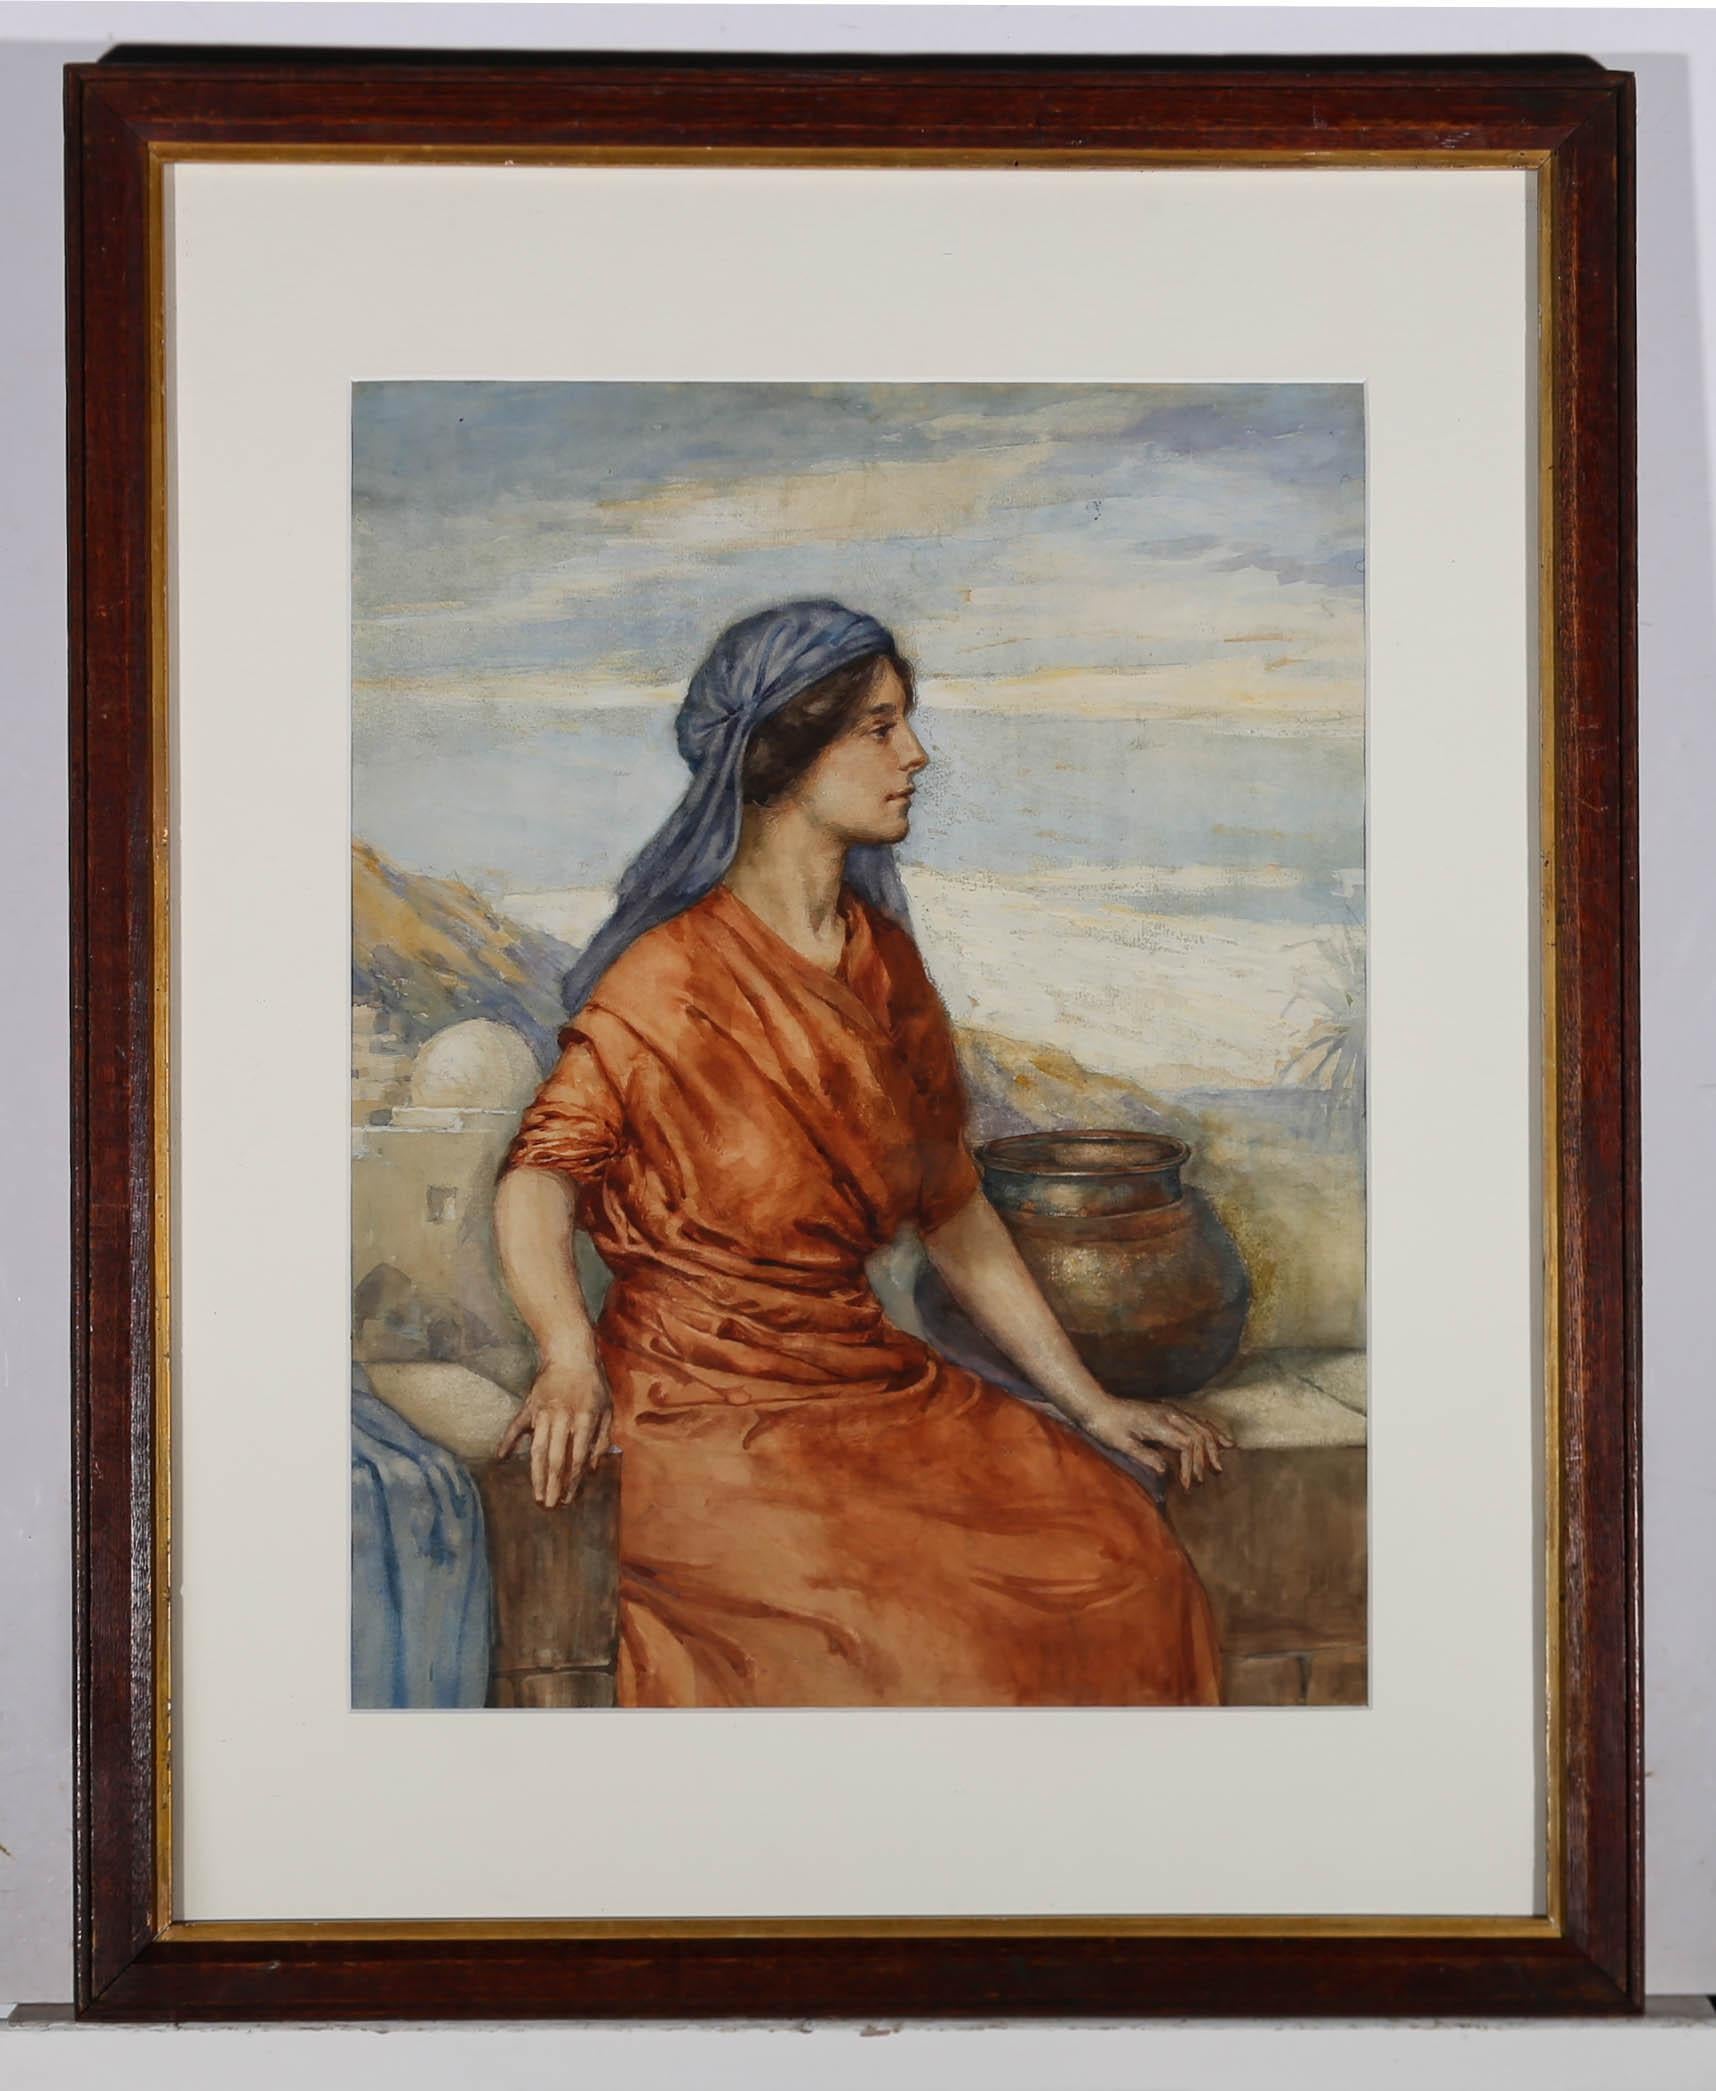 An exquisite late 19th Century watercolours portrait of a beautiful young woman in a Middle Eastern landscape, sitting with elegant poise, on a stone wall. A metal urn sits beside her with a distant view of the sea and a palm tree to the right. The